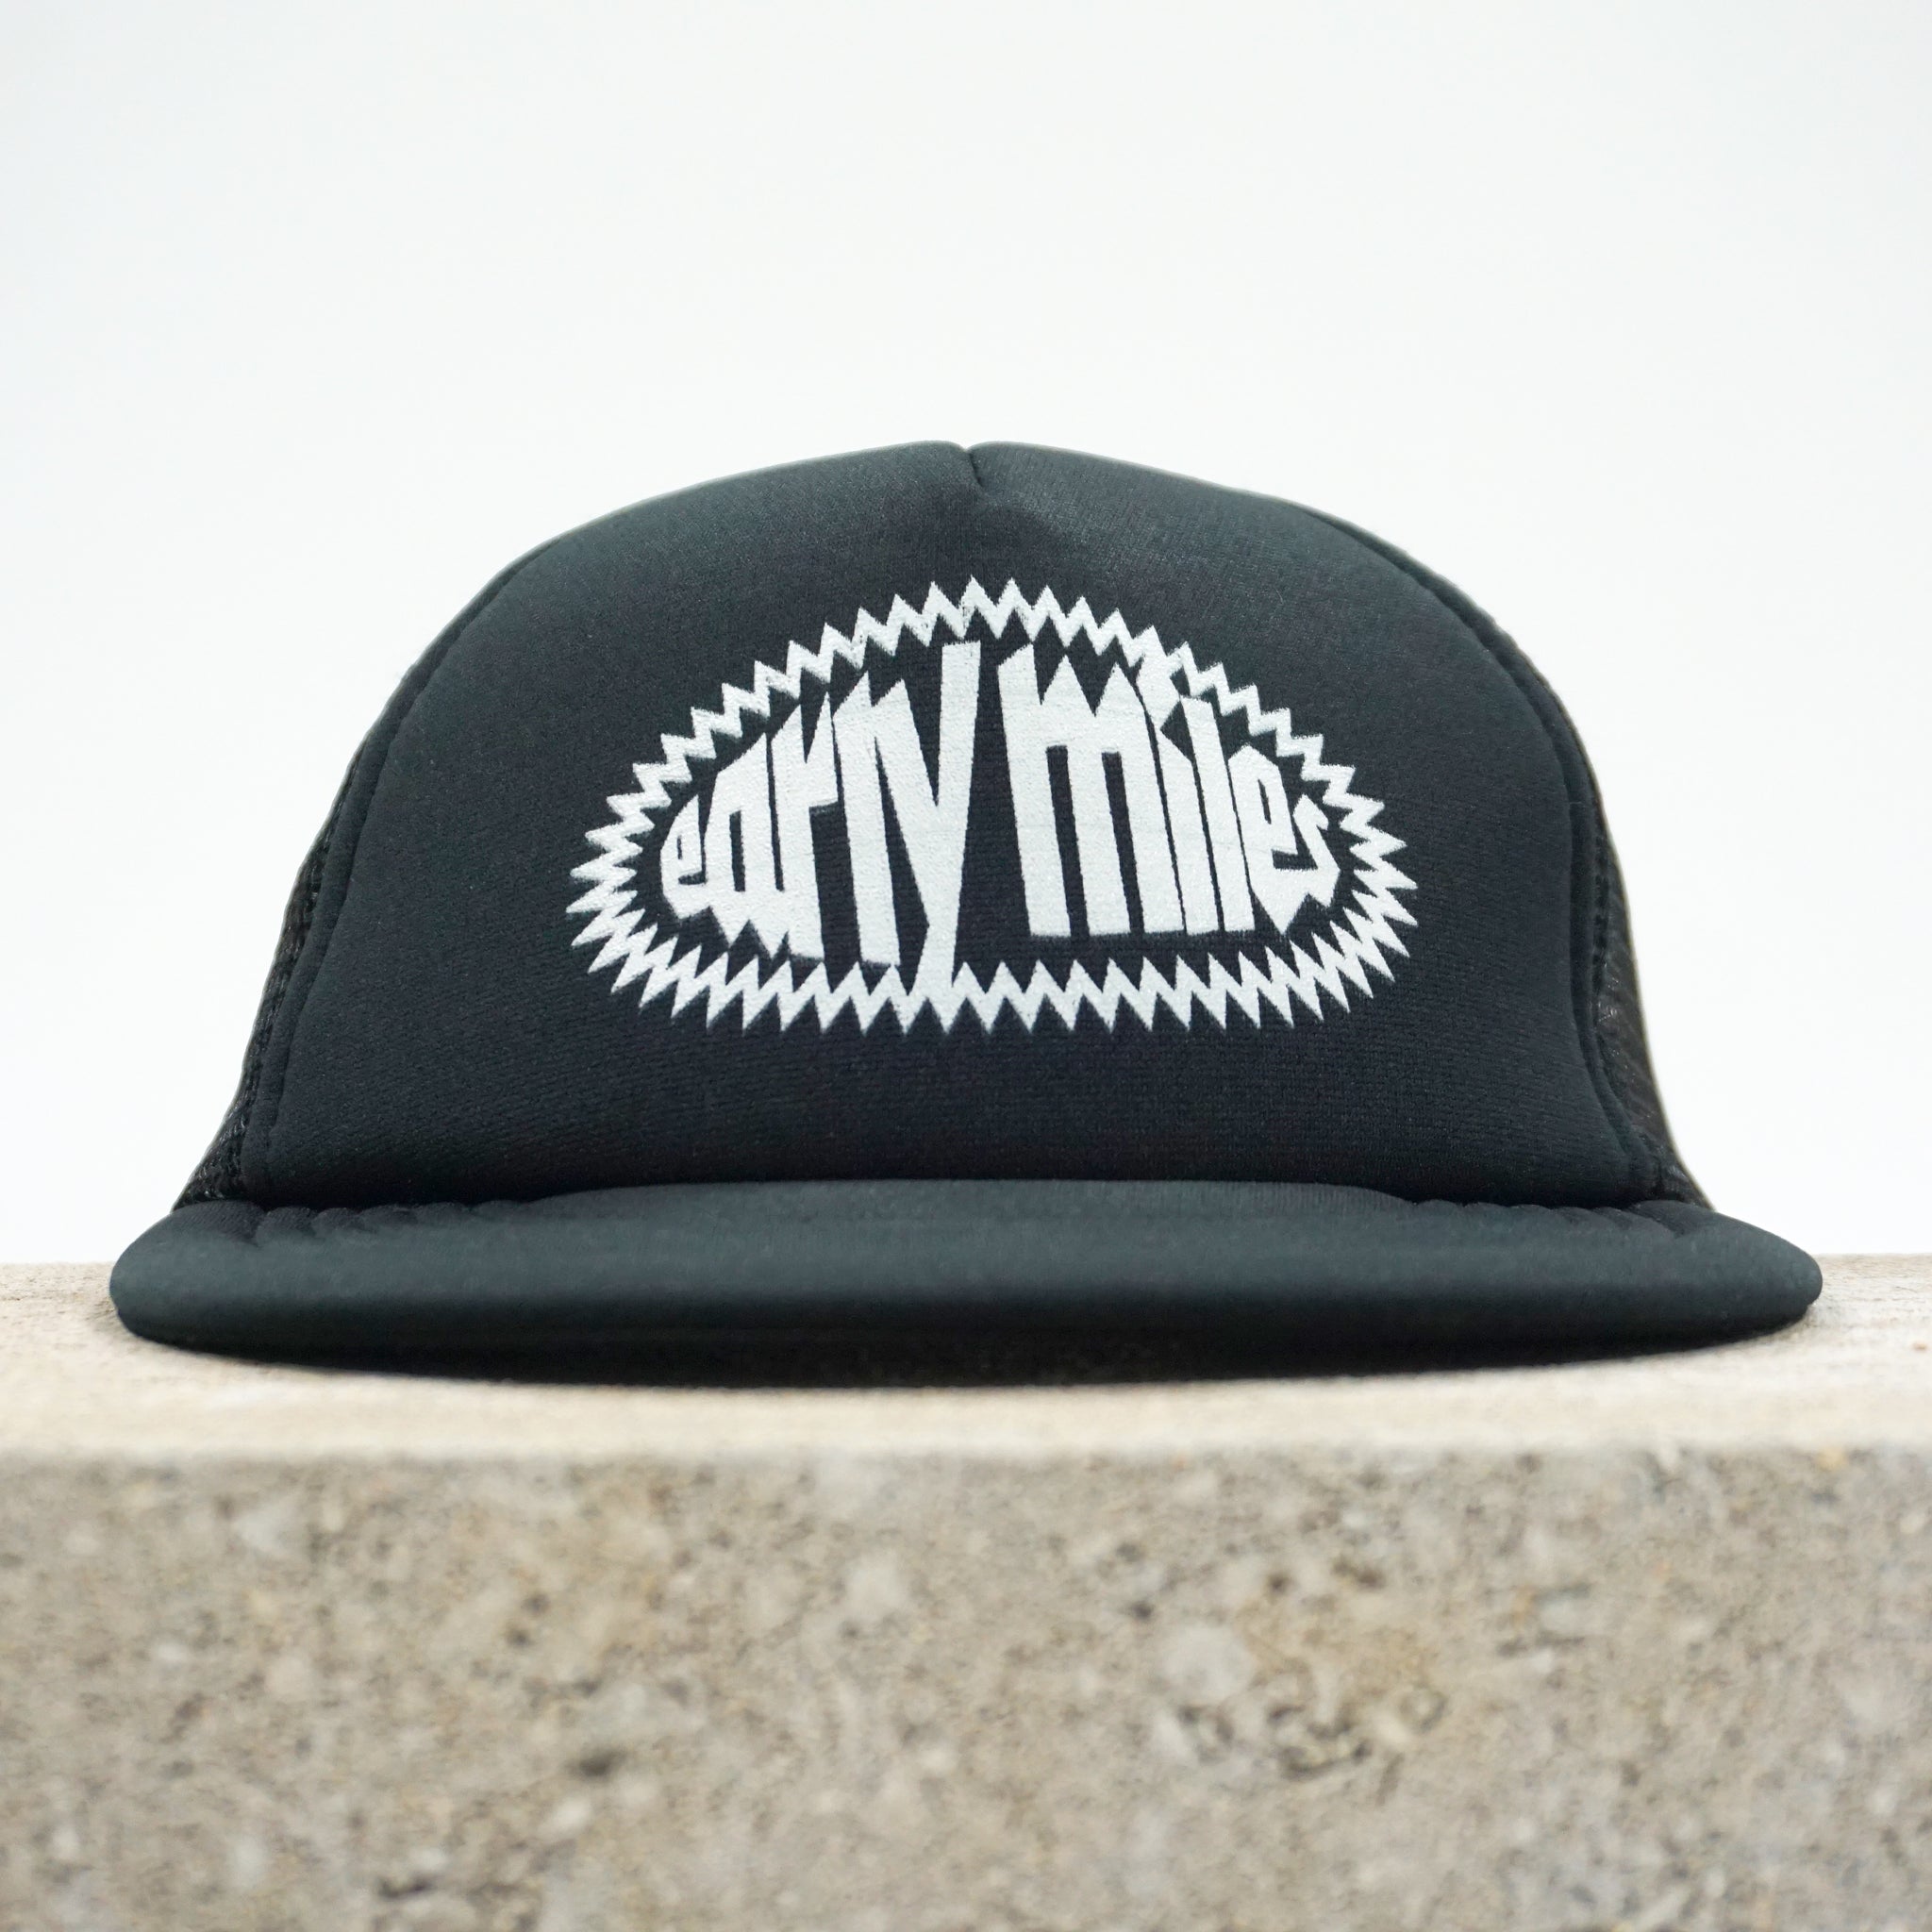 Early Miles - Sublime Trucker Hat (Black)